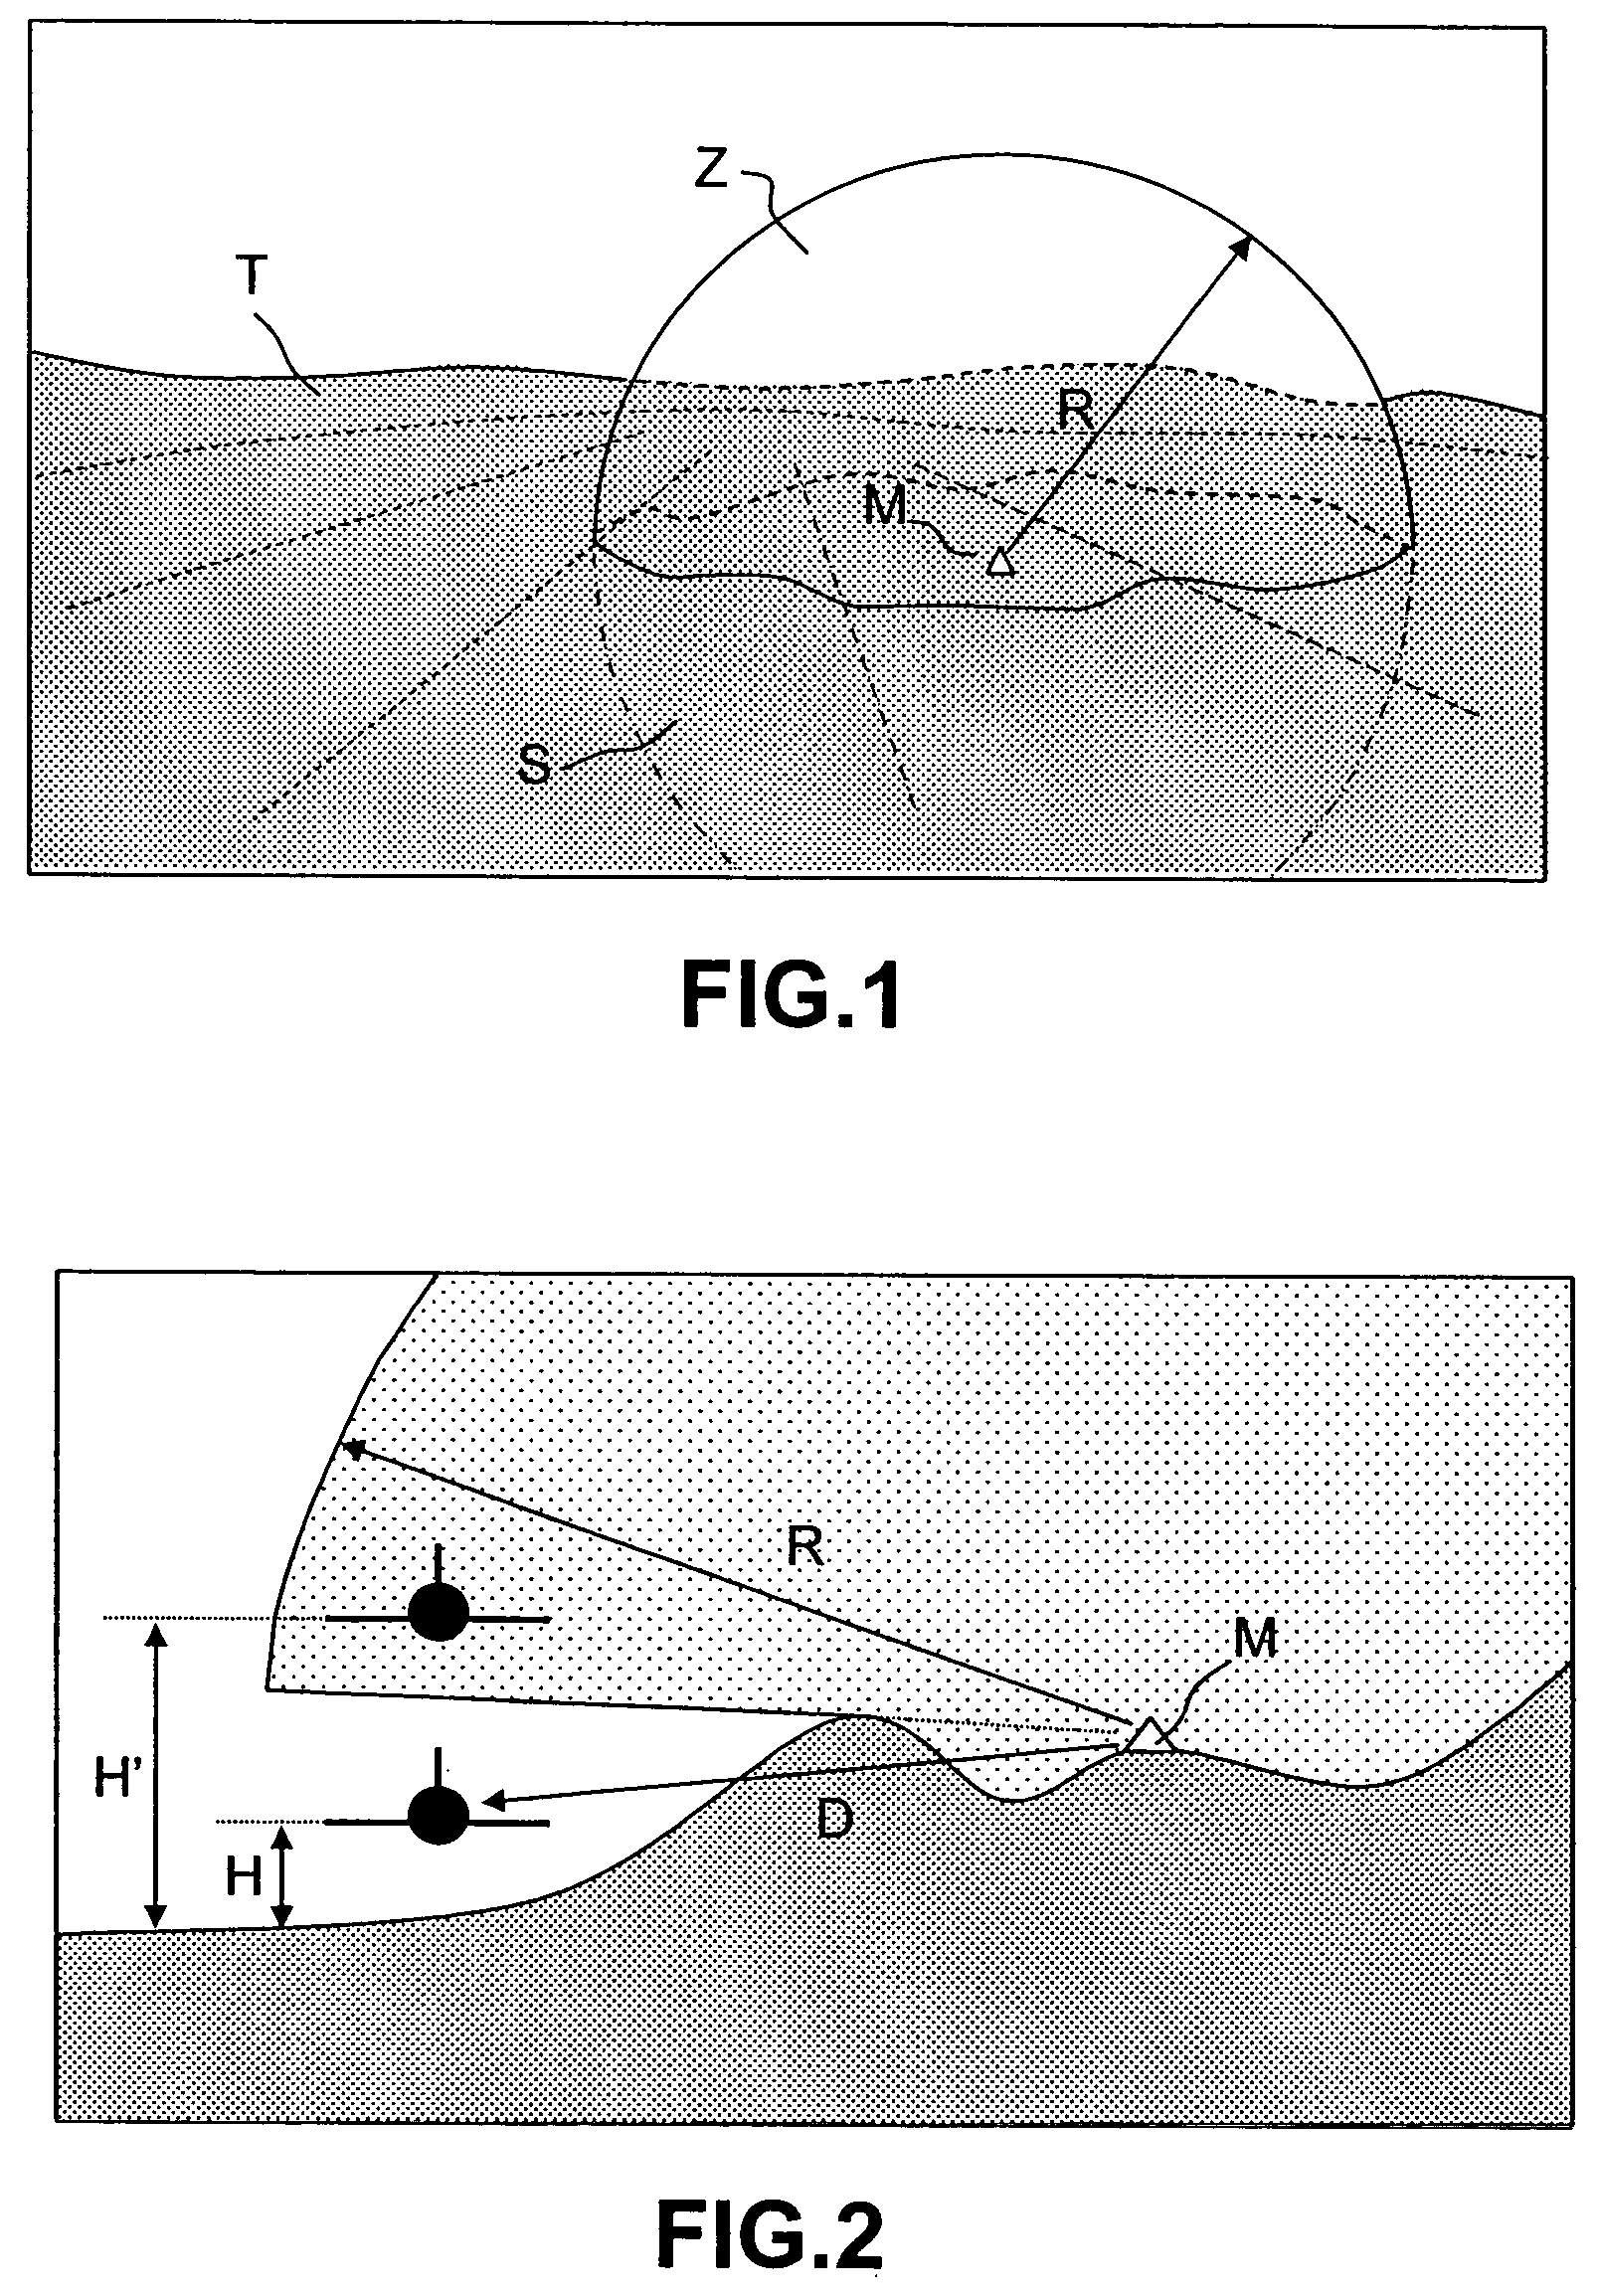 Method for the synthesis of a 3D intervisibility image